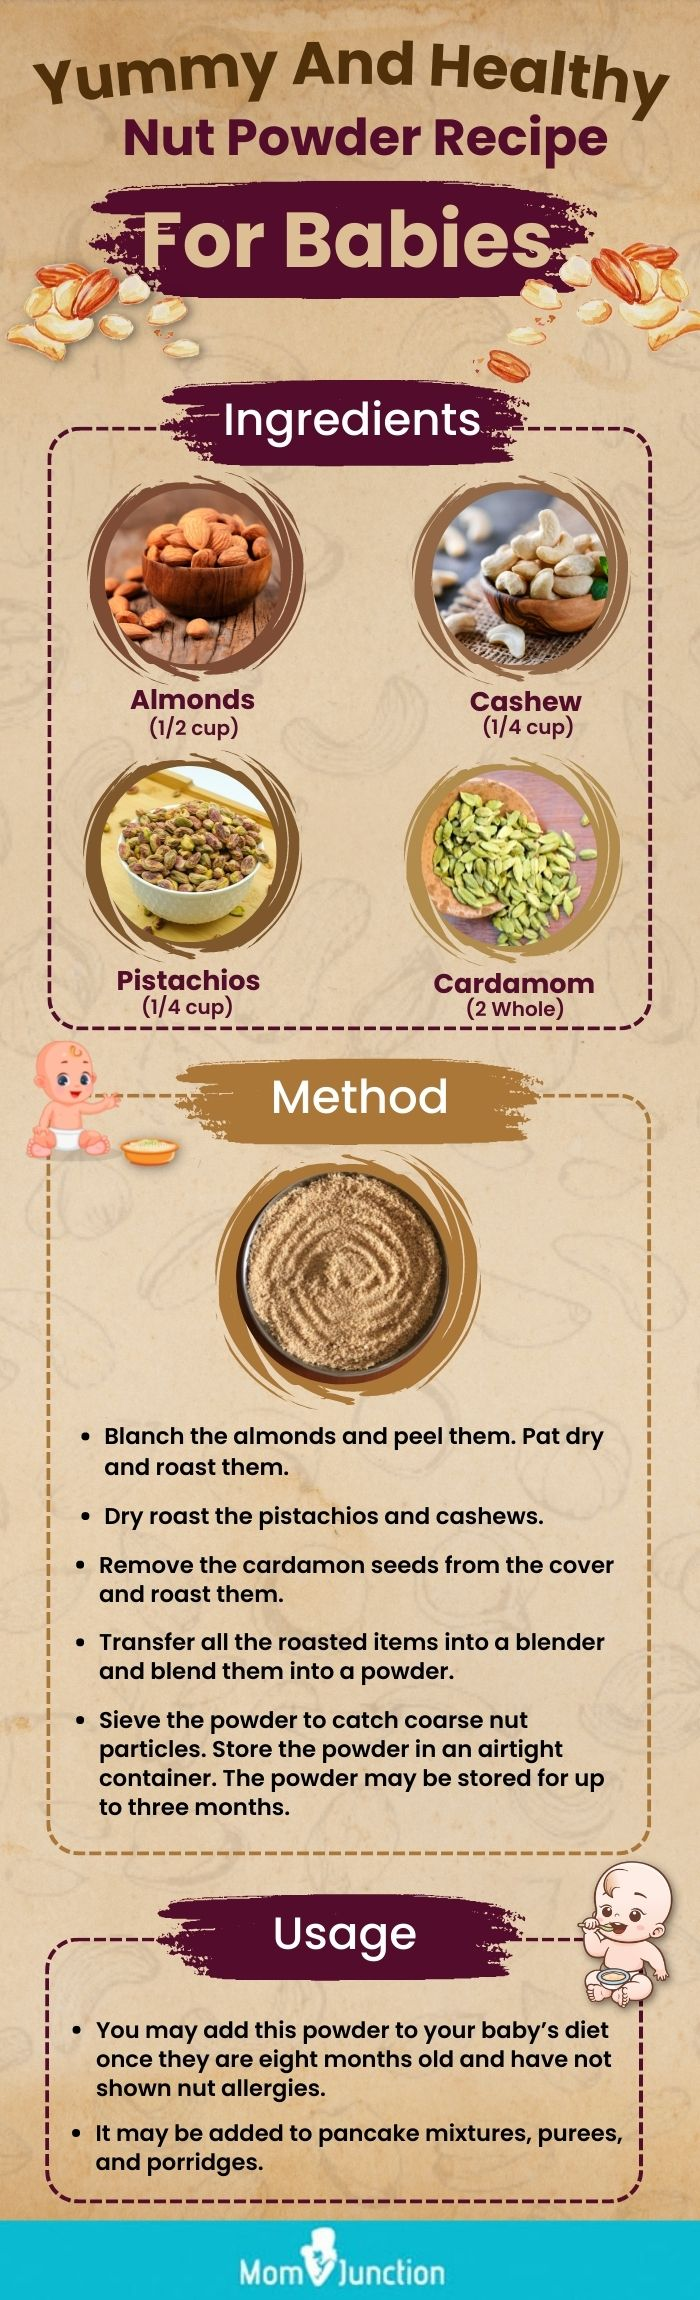 yummy and healthy nut powder recipe for babies (infographic)